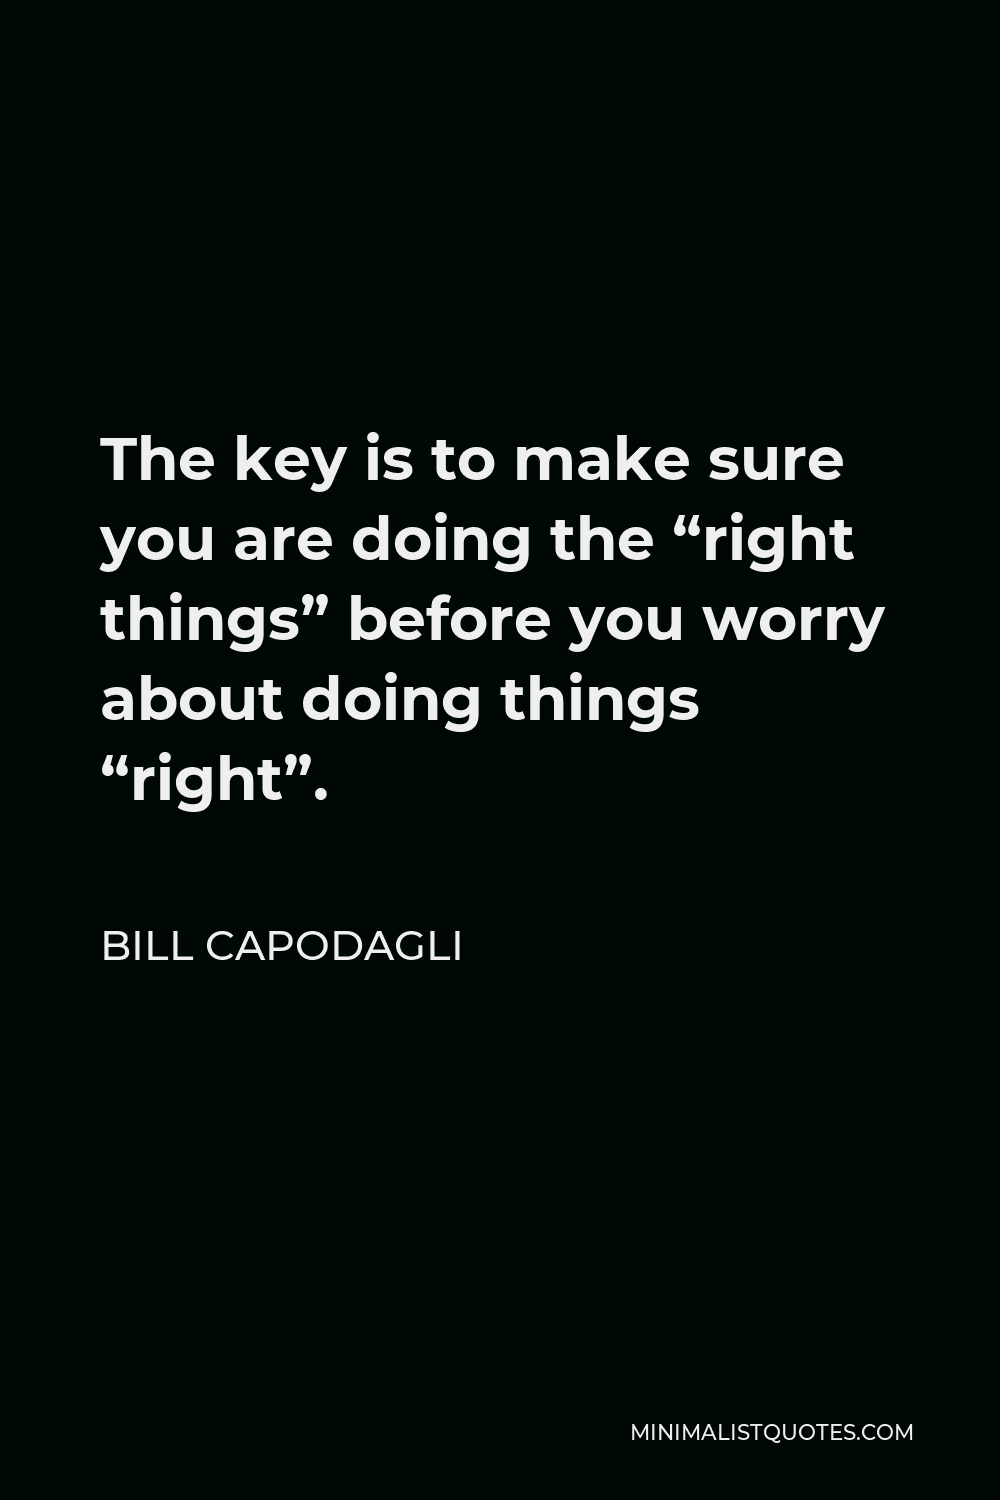 Bill Capodagli Quote - The key is to make sure you are doing the “right things” before you worry about doing things “right”.